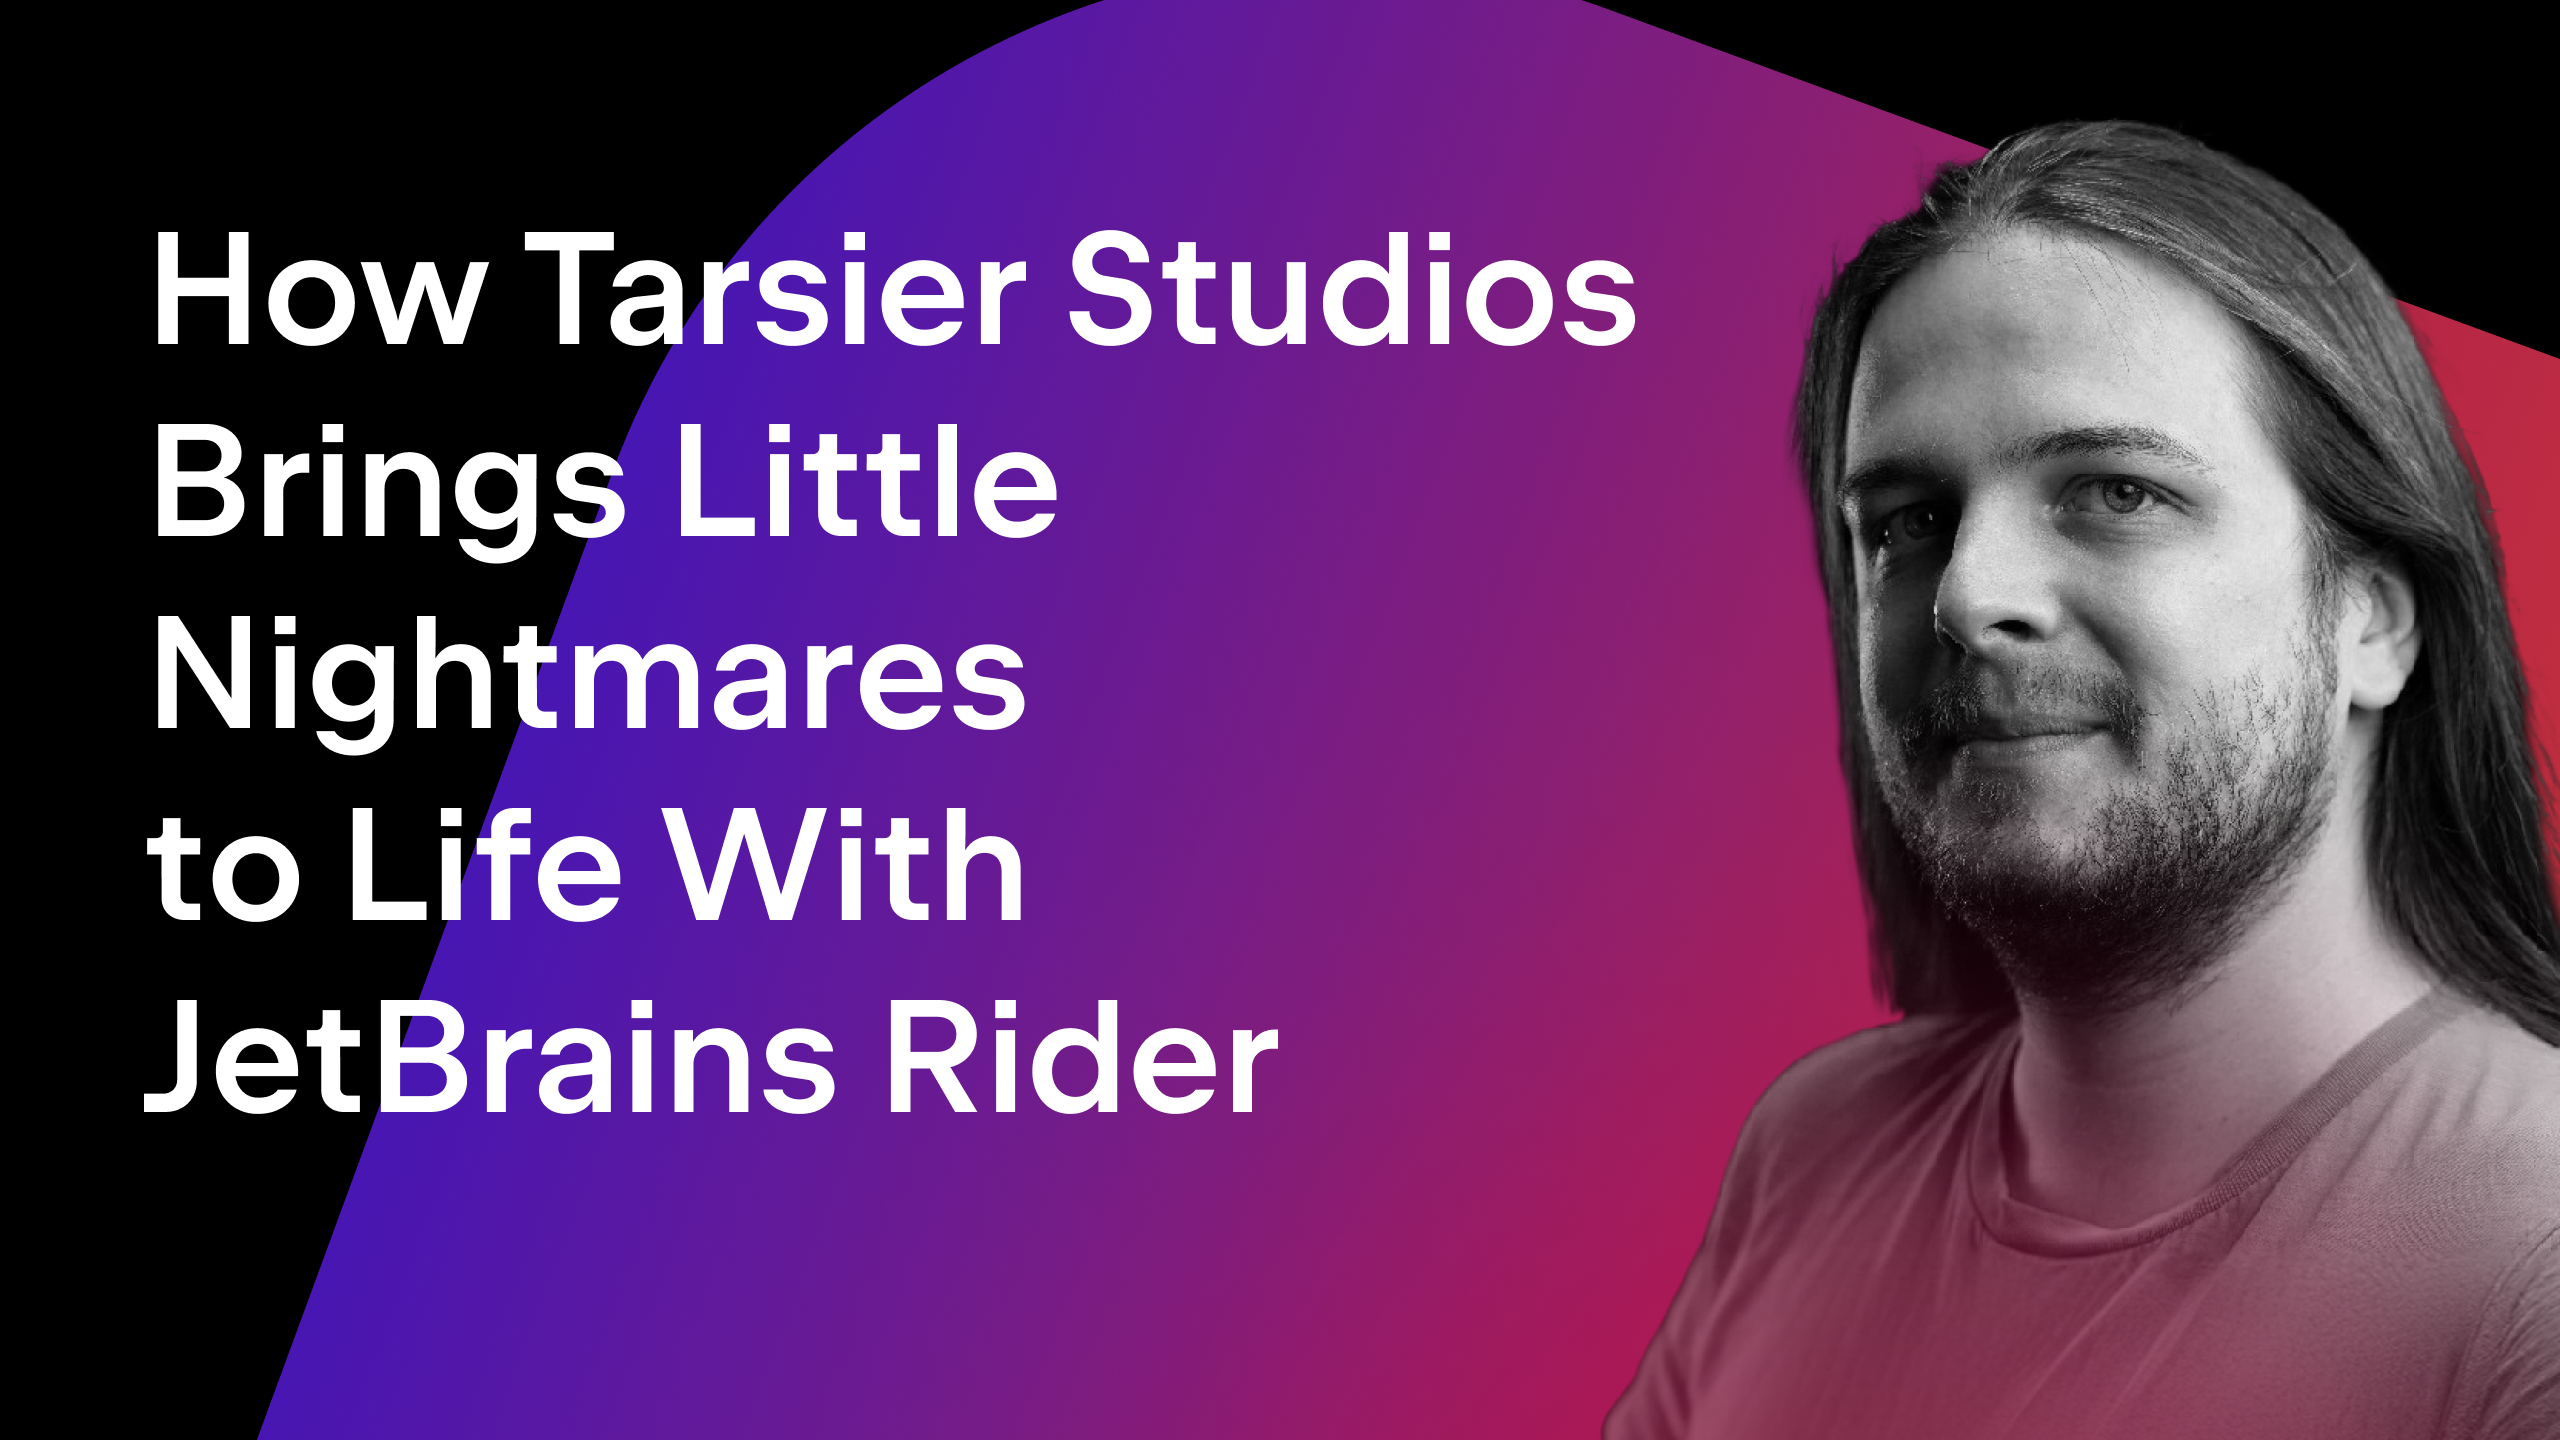 How Tarsier Studios Brings Little Nightmares to Life With JetBrains Rider - Blog Featured